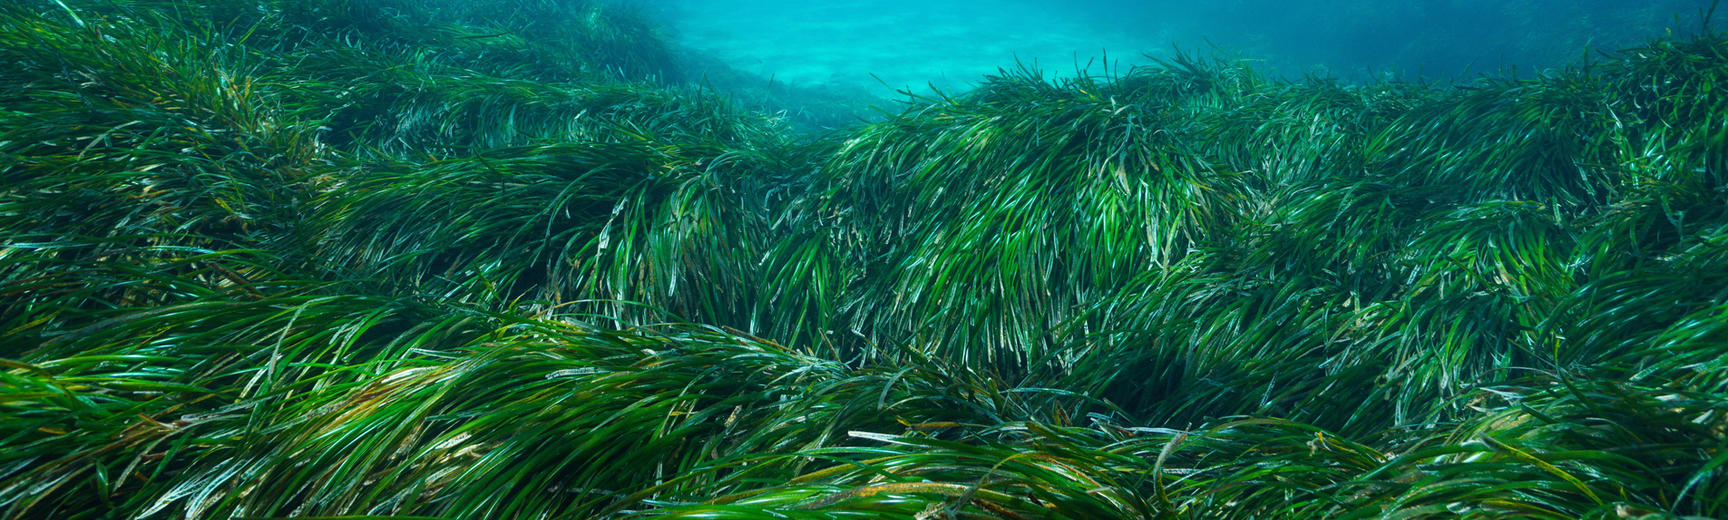 A half-under-water half-over-water photo, showing lush green seagrass growing on the seabed with clouds and blue sky above the surface